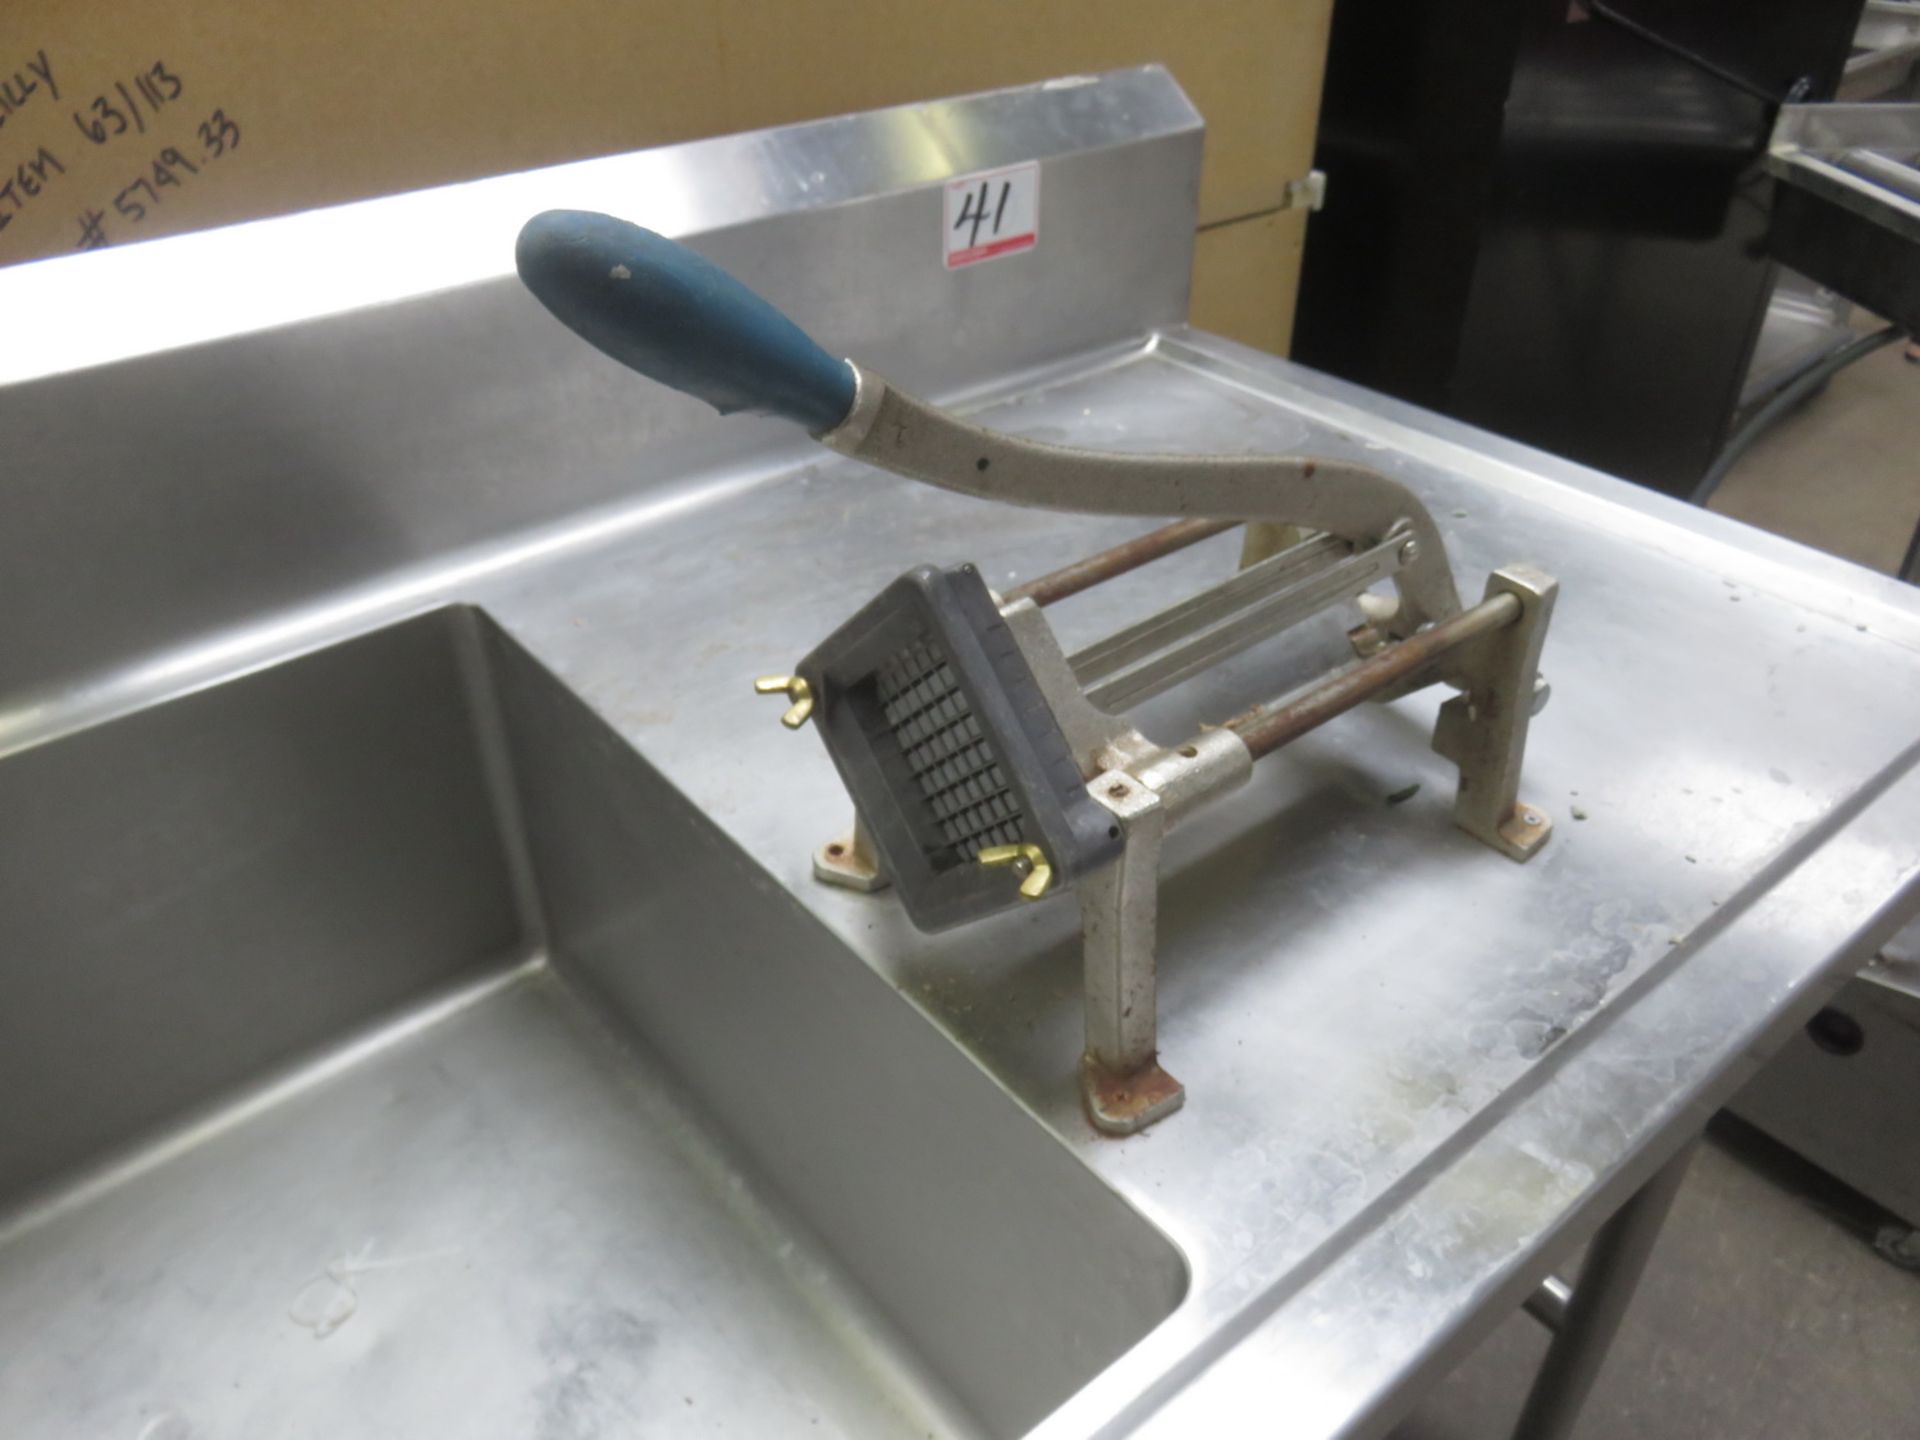 GENERAL S/S 30" X 102" 2-COMPARTMENT SINK W/ TAPS C/W POTATO DICER - Image 3 of 3